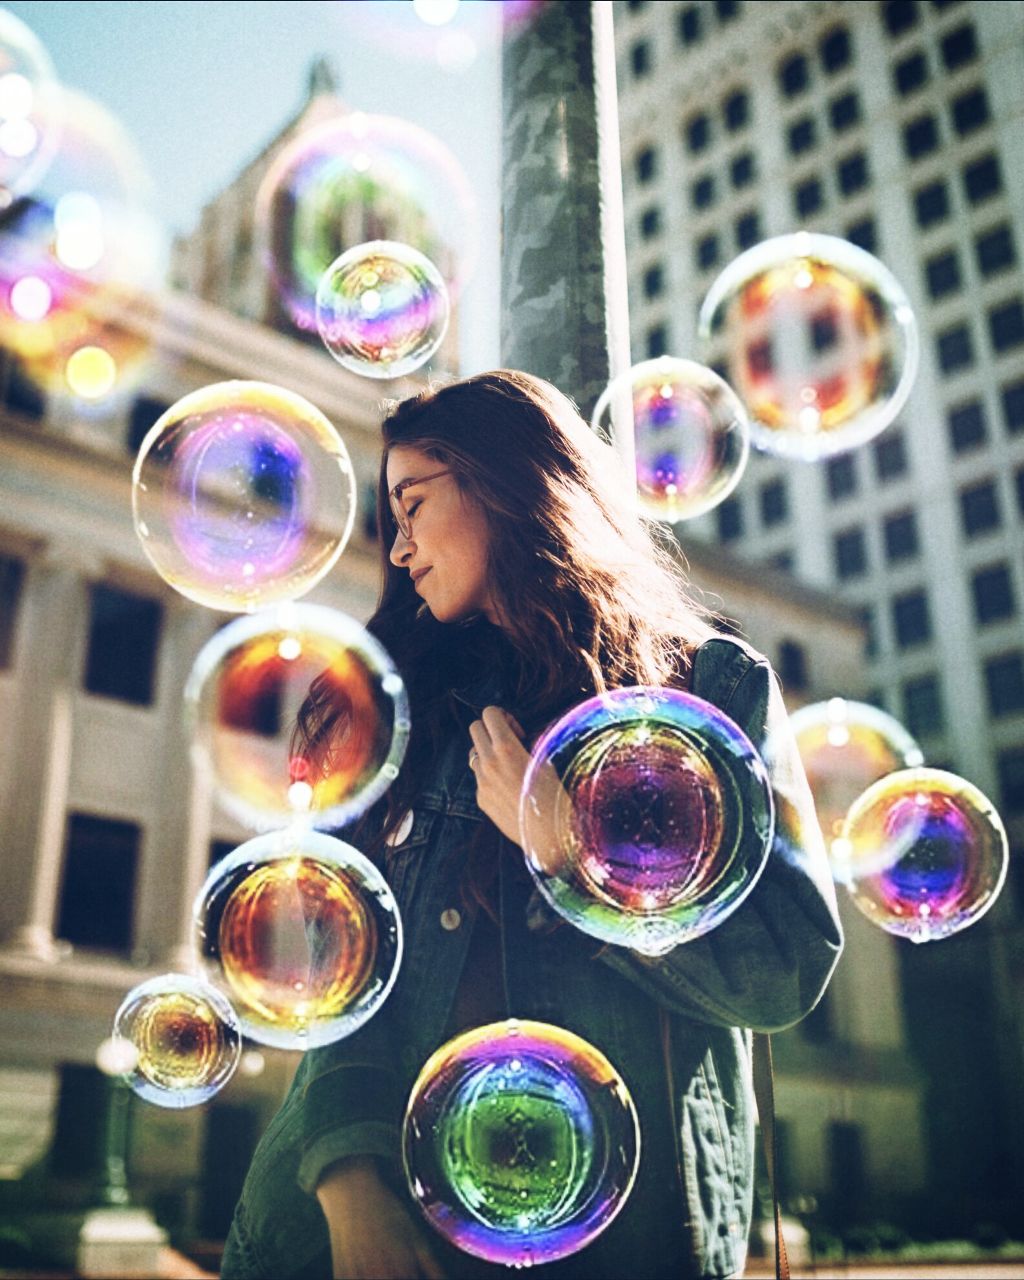 How would you incorporate bubbles in your pics? We absolutely love this Remixed photo by @madhavibarot who created an extra dimension to the pic by @freeto